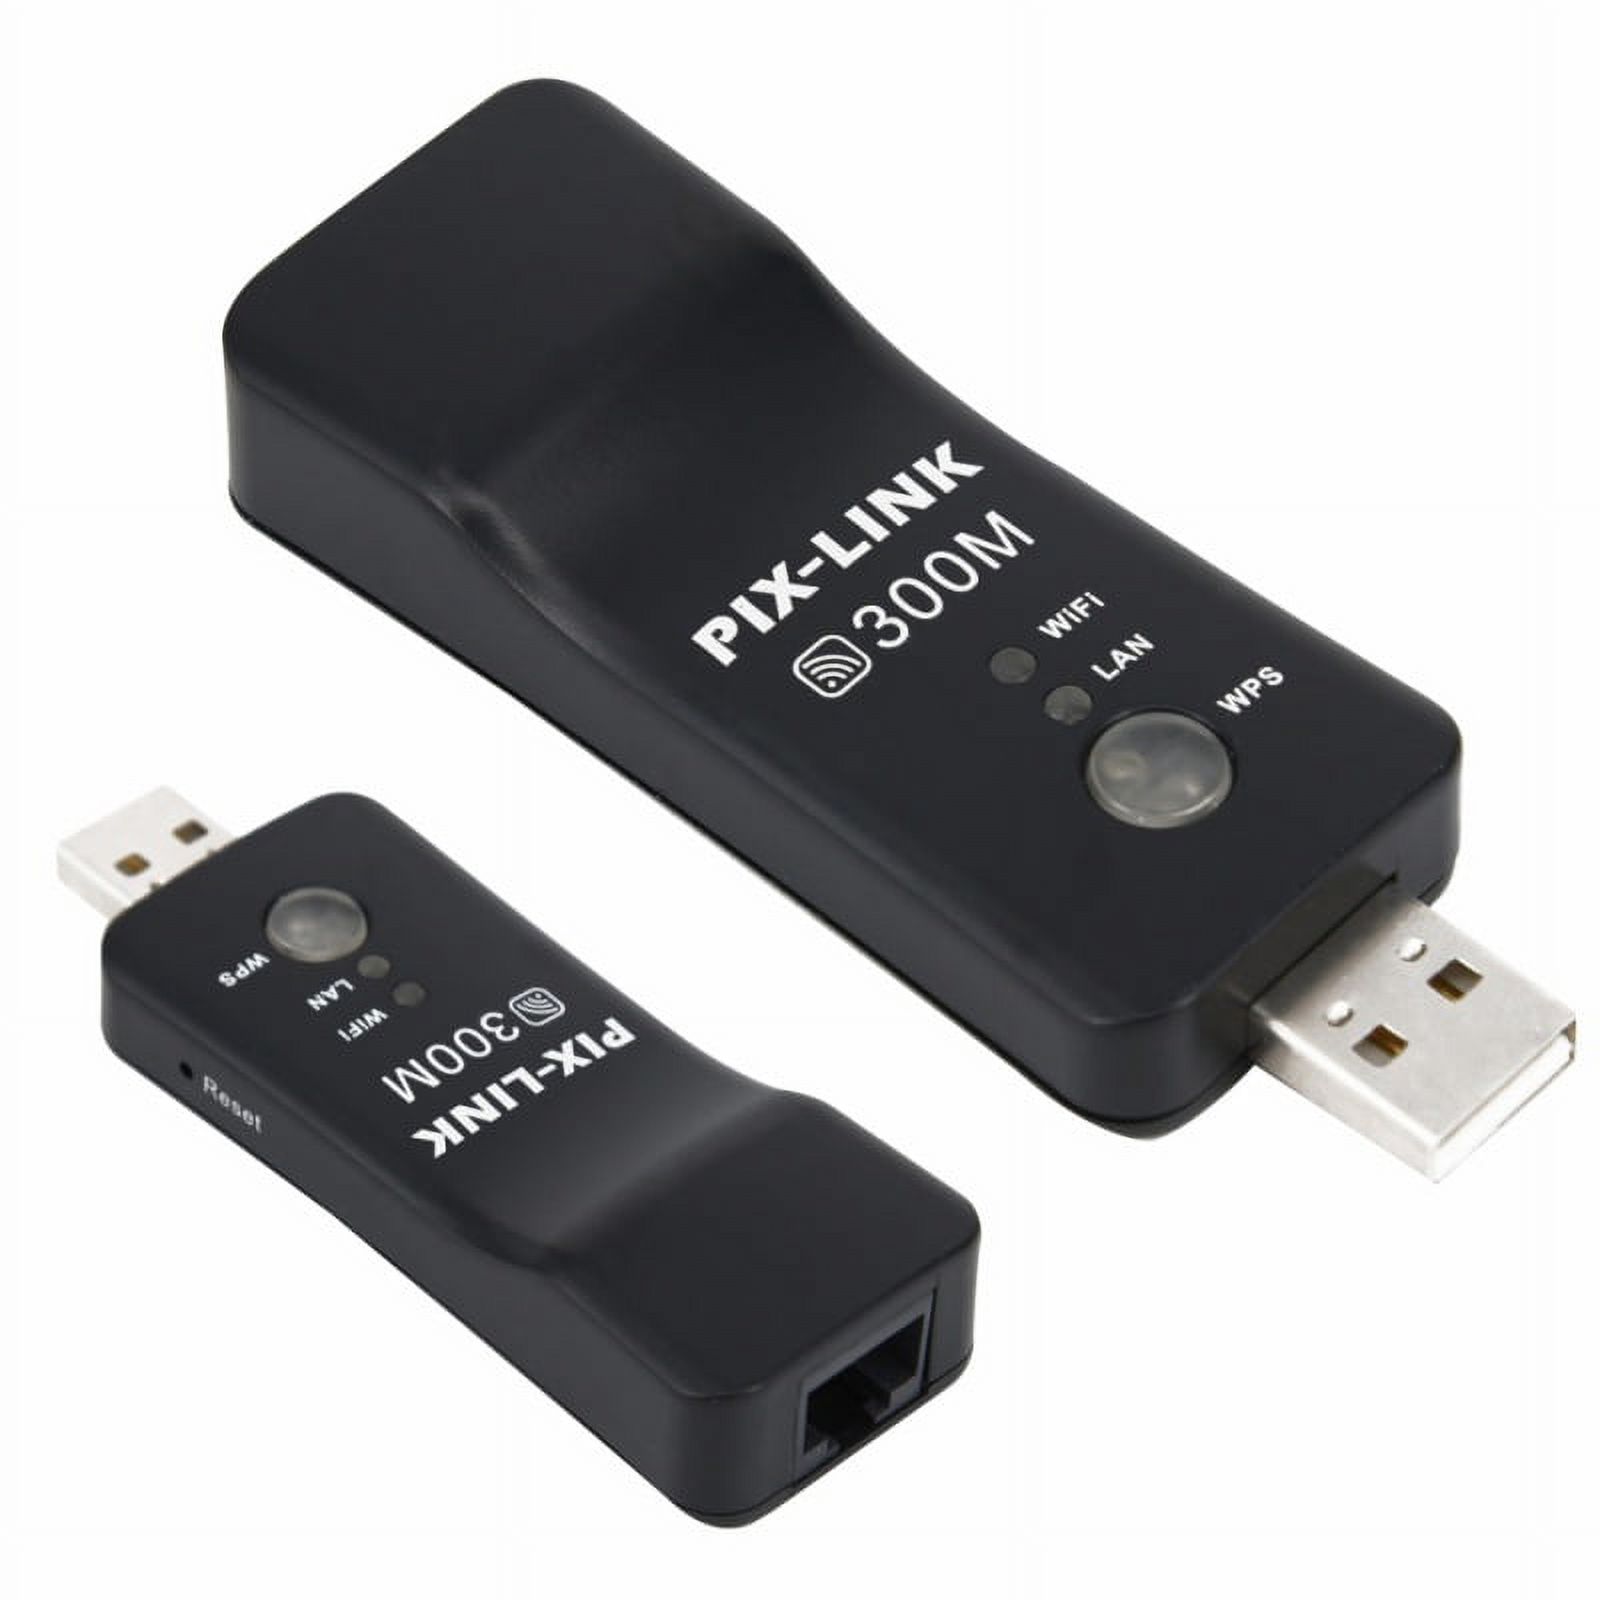 USB Wireless LAN Adapter WiFi Dongle for Smart TV Blu-Ray Player BDP-BX37 - image 3 of 8